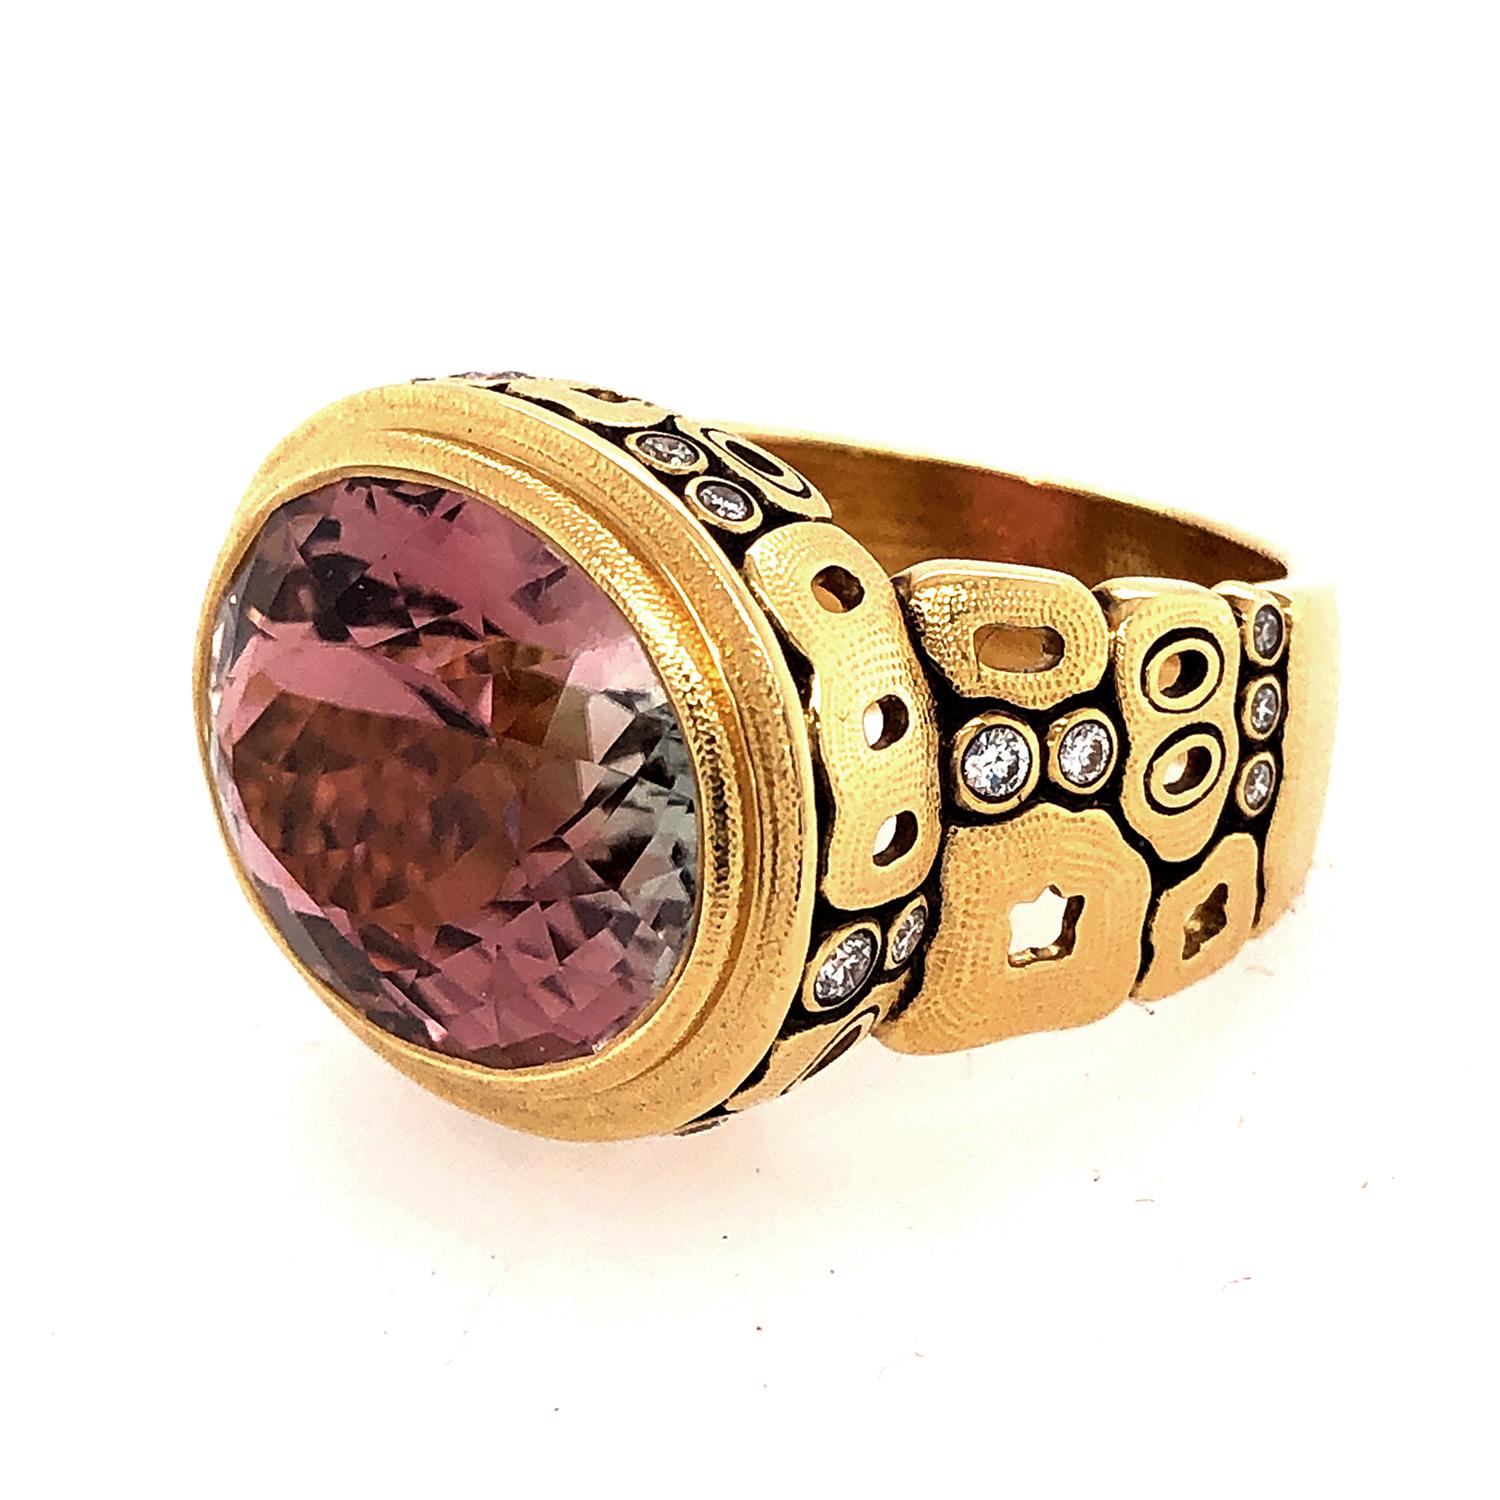 From the studio of Alex Sepkus in New York - 18 karat yellow gold ring with stunning oval shaped faceted bicolor  tourmaline, set with 20 brilliant cut white diamonds. This ring is of heirloom quality you love and expect from Alex Sepkus.

Bicolor